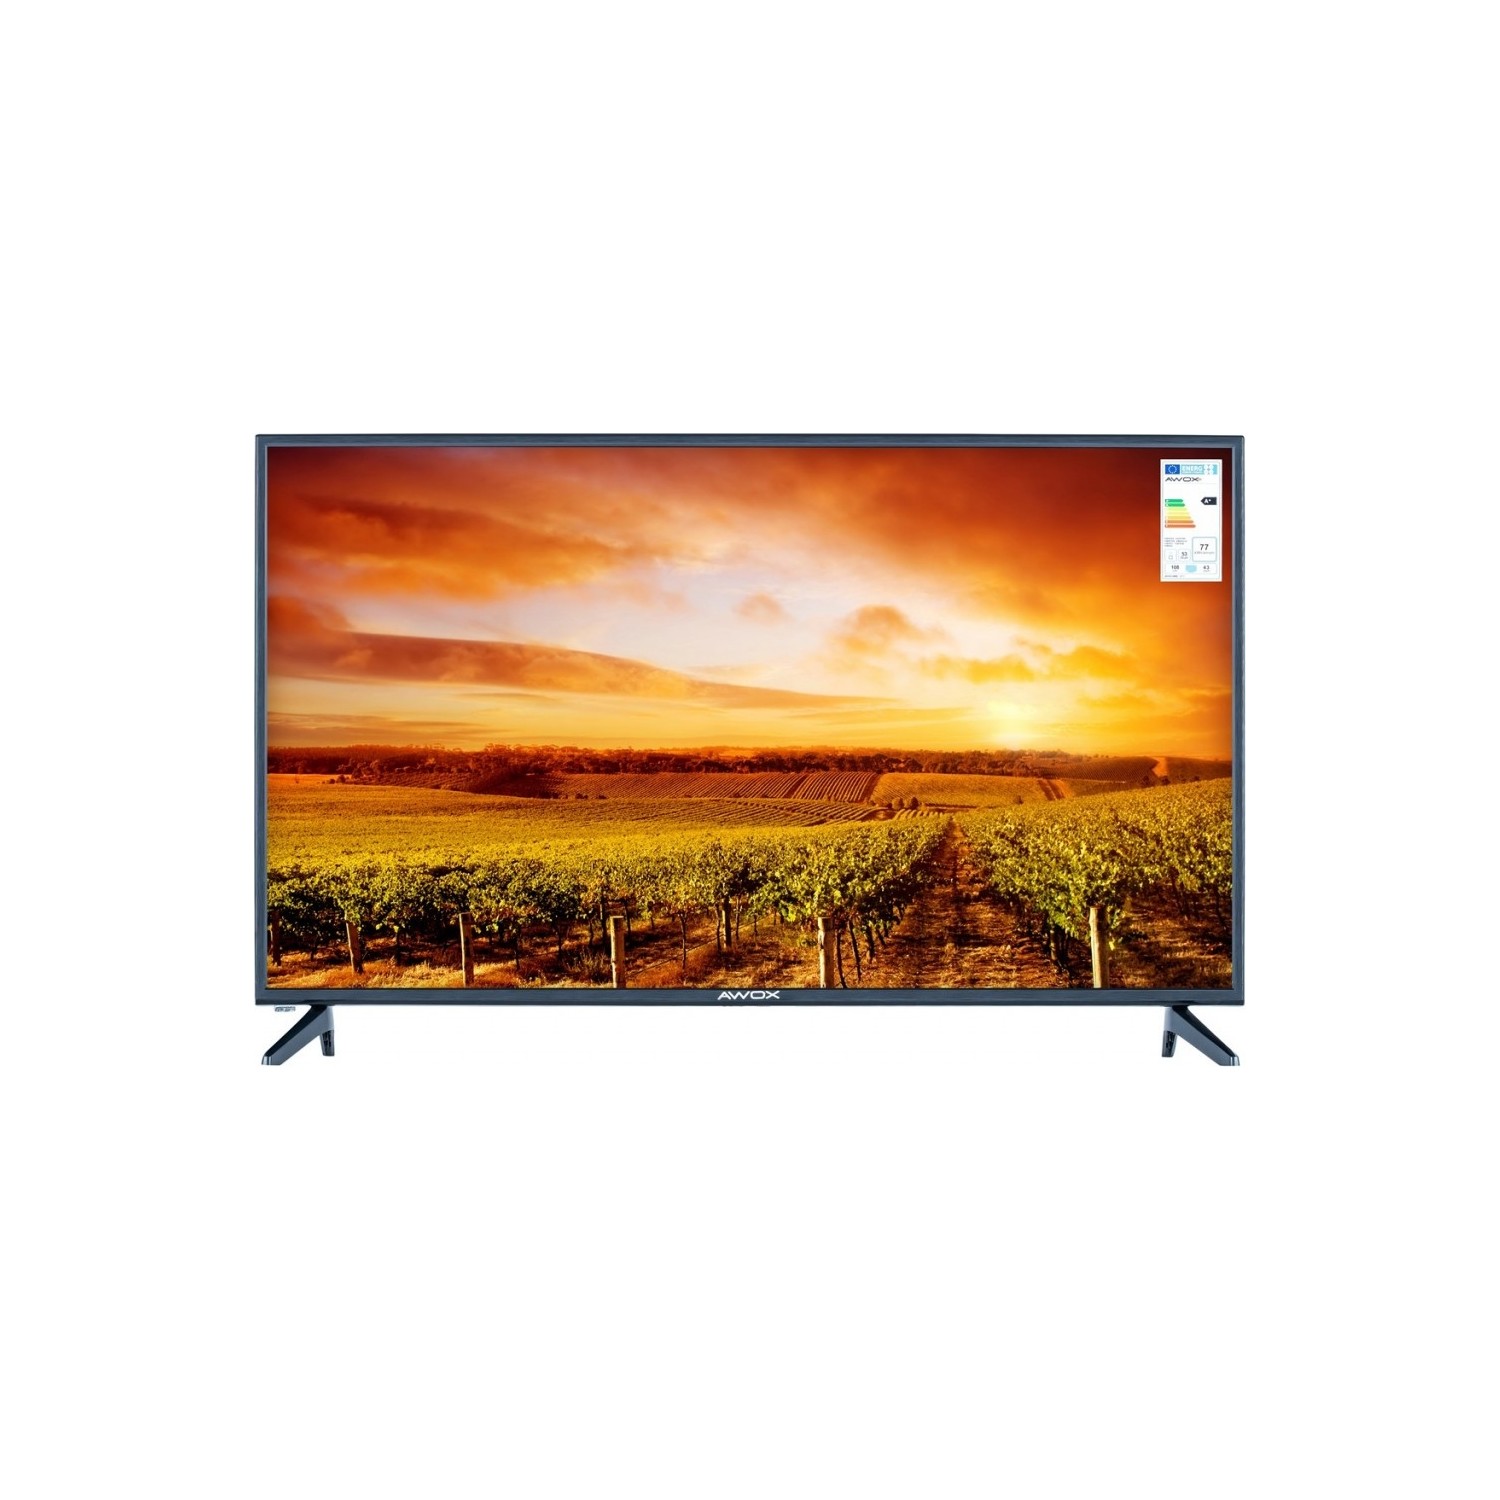 Awox B206500S 65" 4K Ultra HD Android Smart LED TV